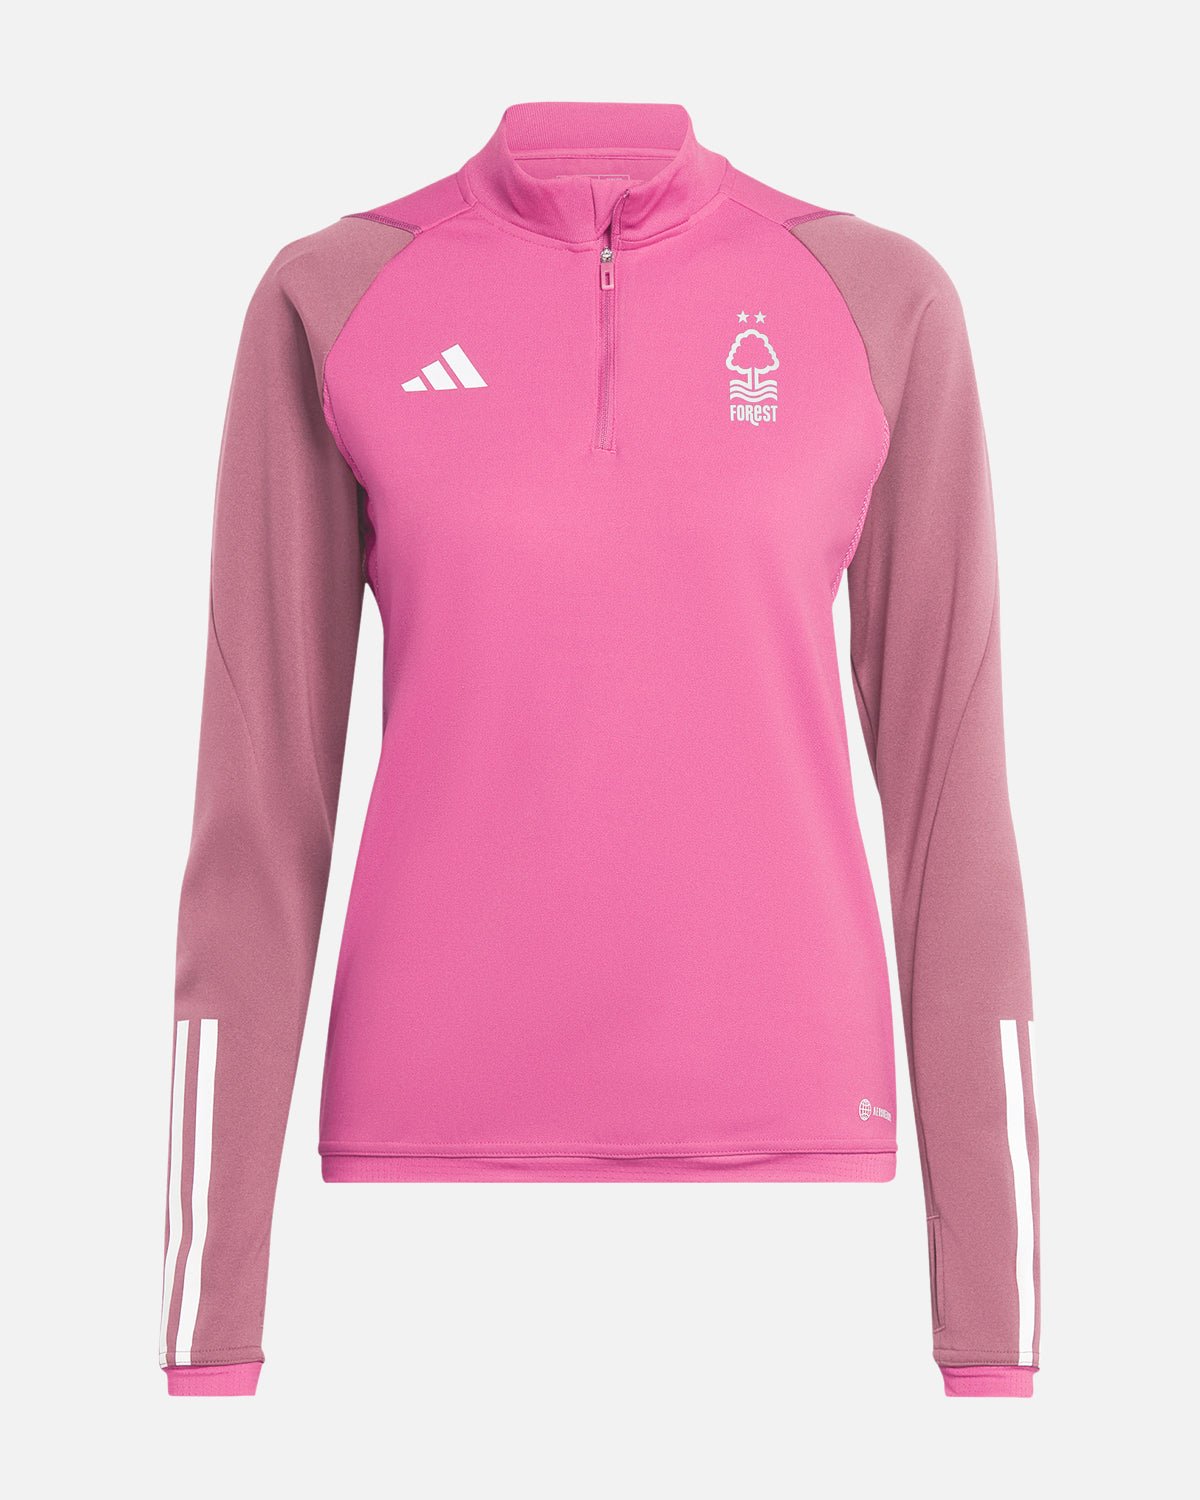 NFFC Women's Pink Warm Up Top 23-24 - Nottingham Forest FC